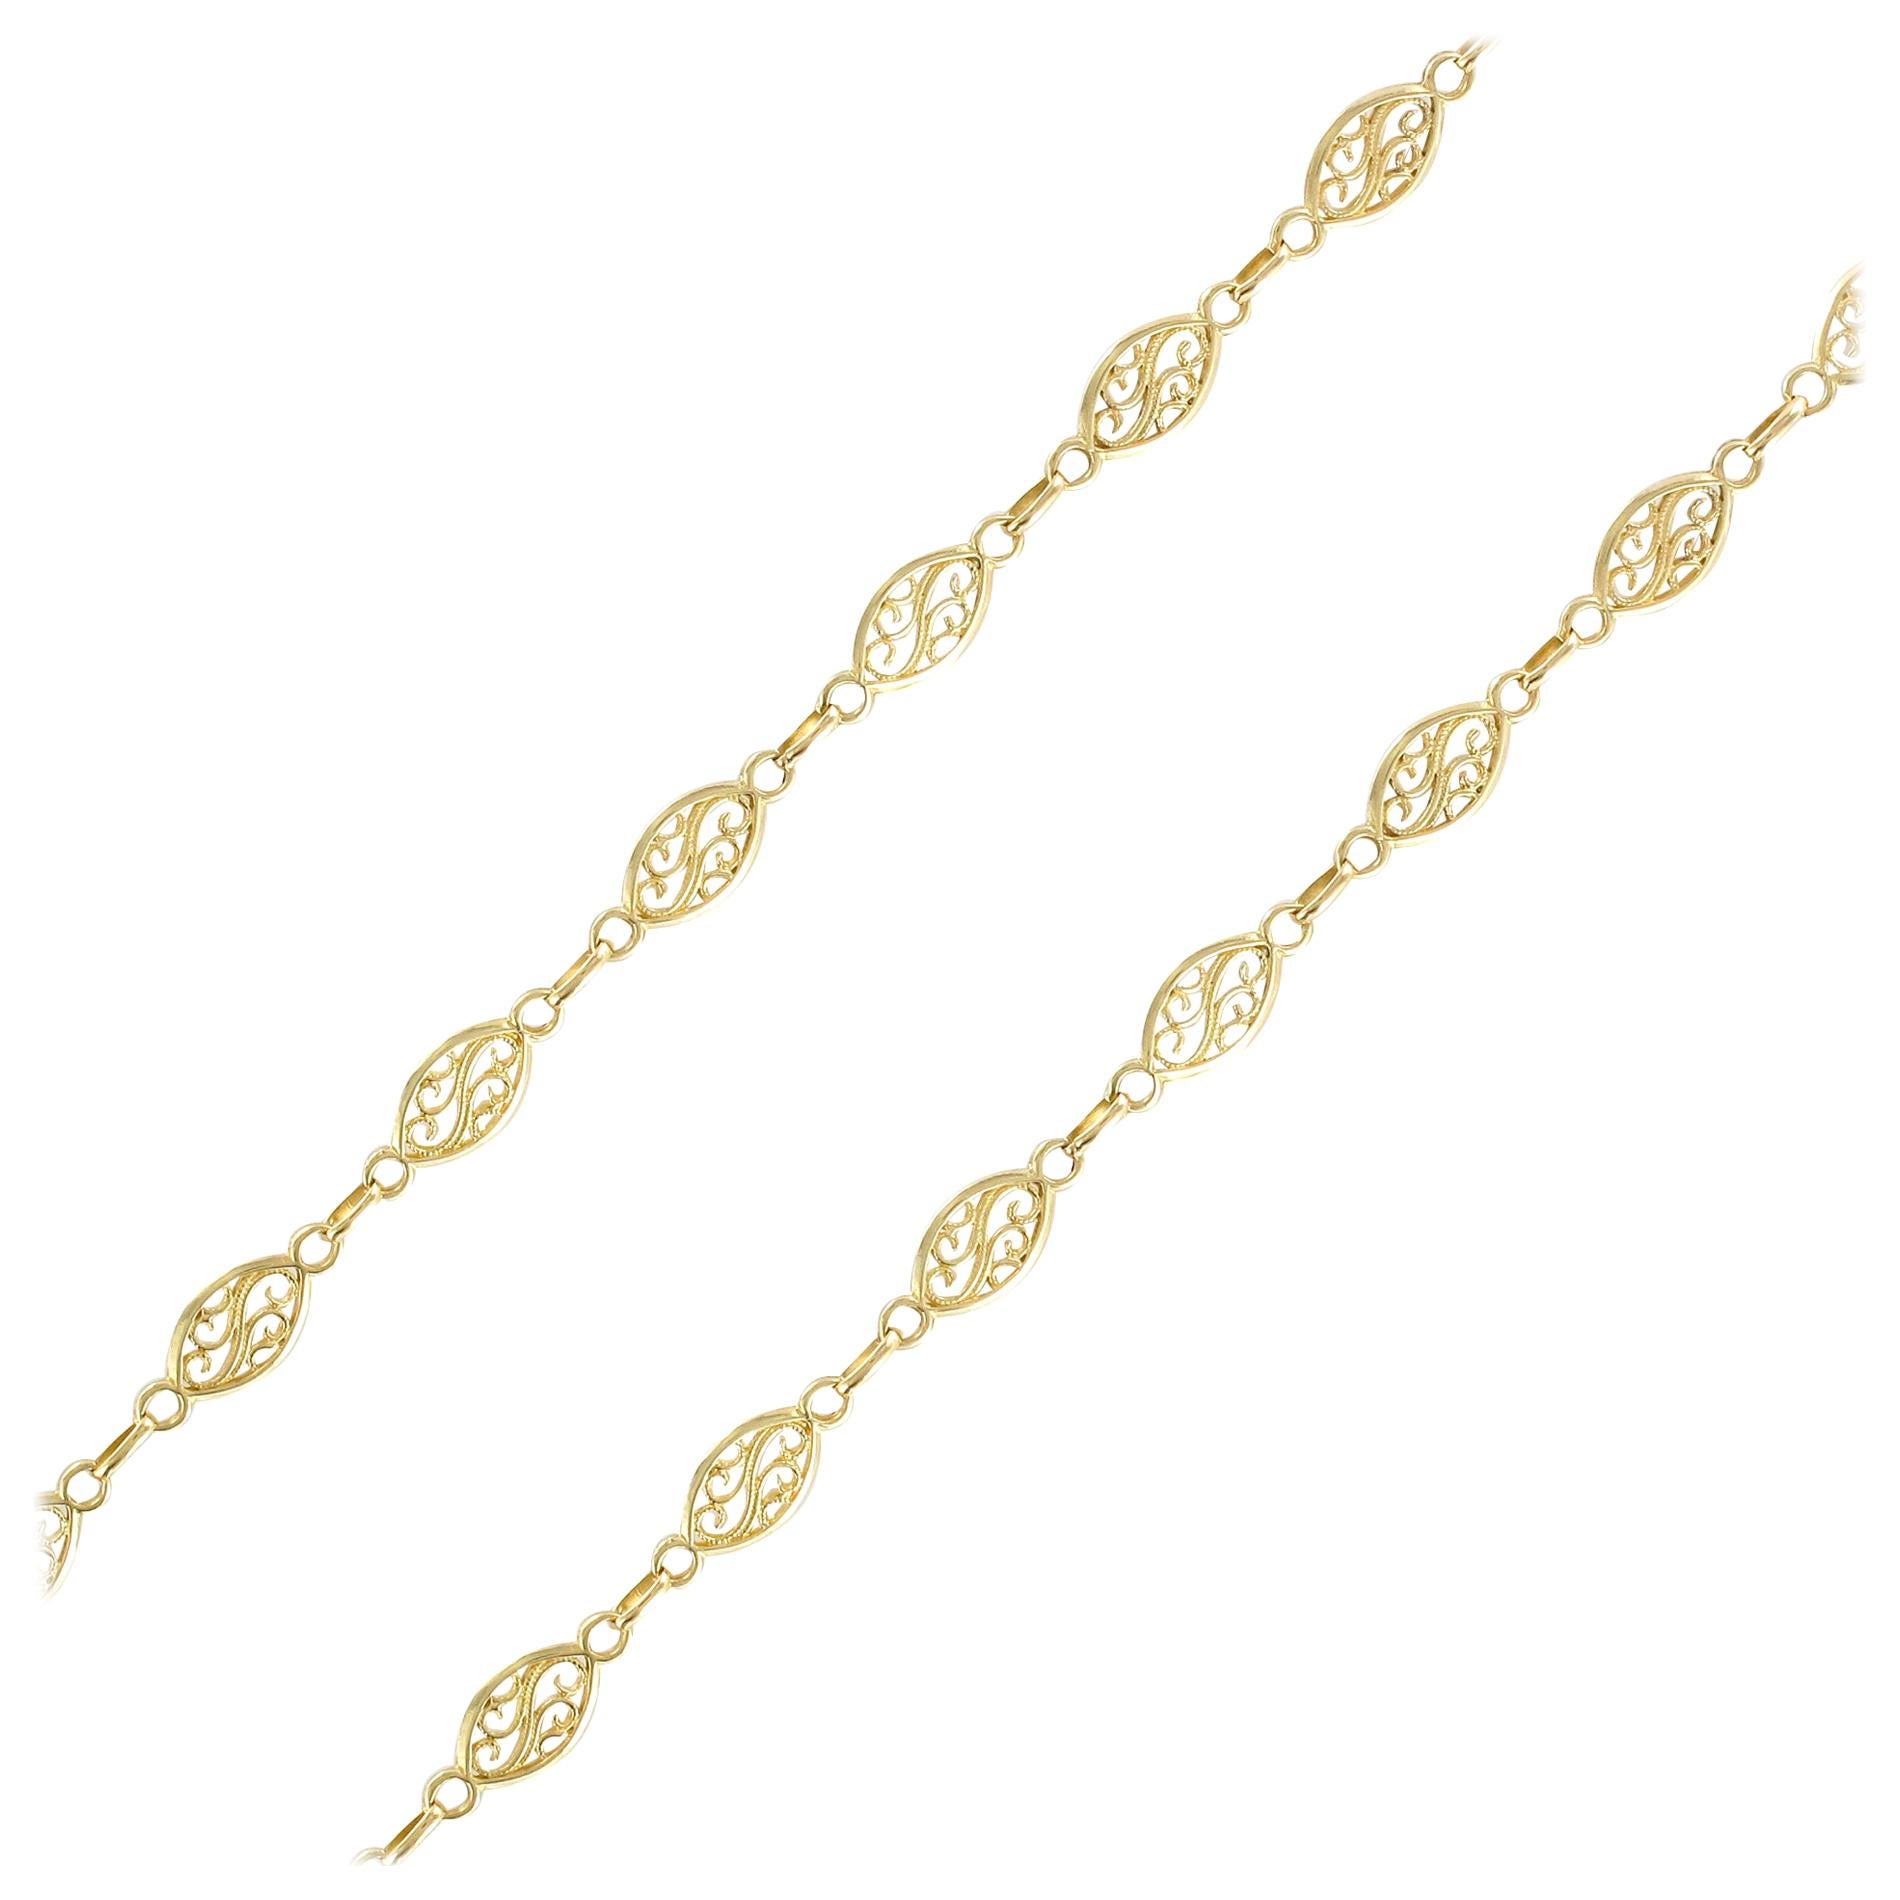 20th Century French 18 Karat Yellow Gold Filigree Shuttle Chain Necklace